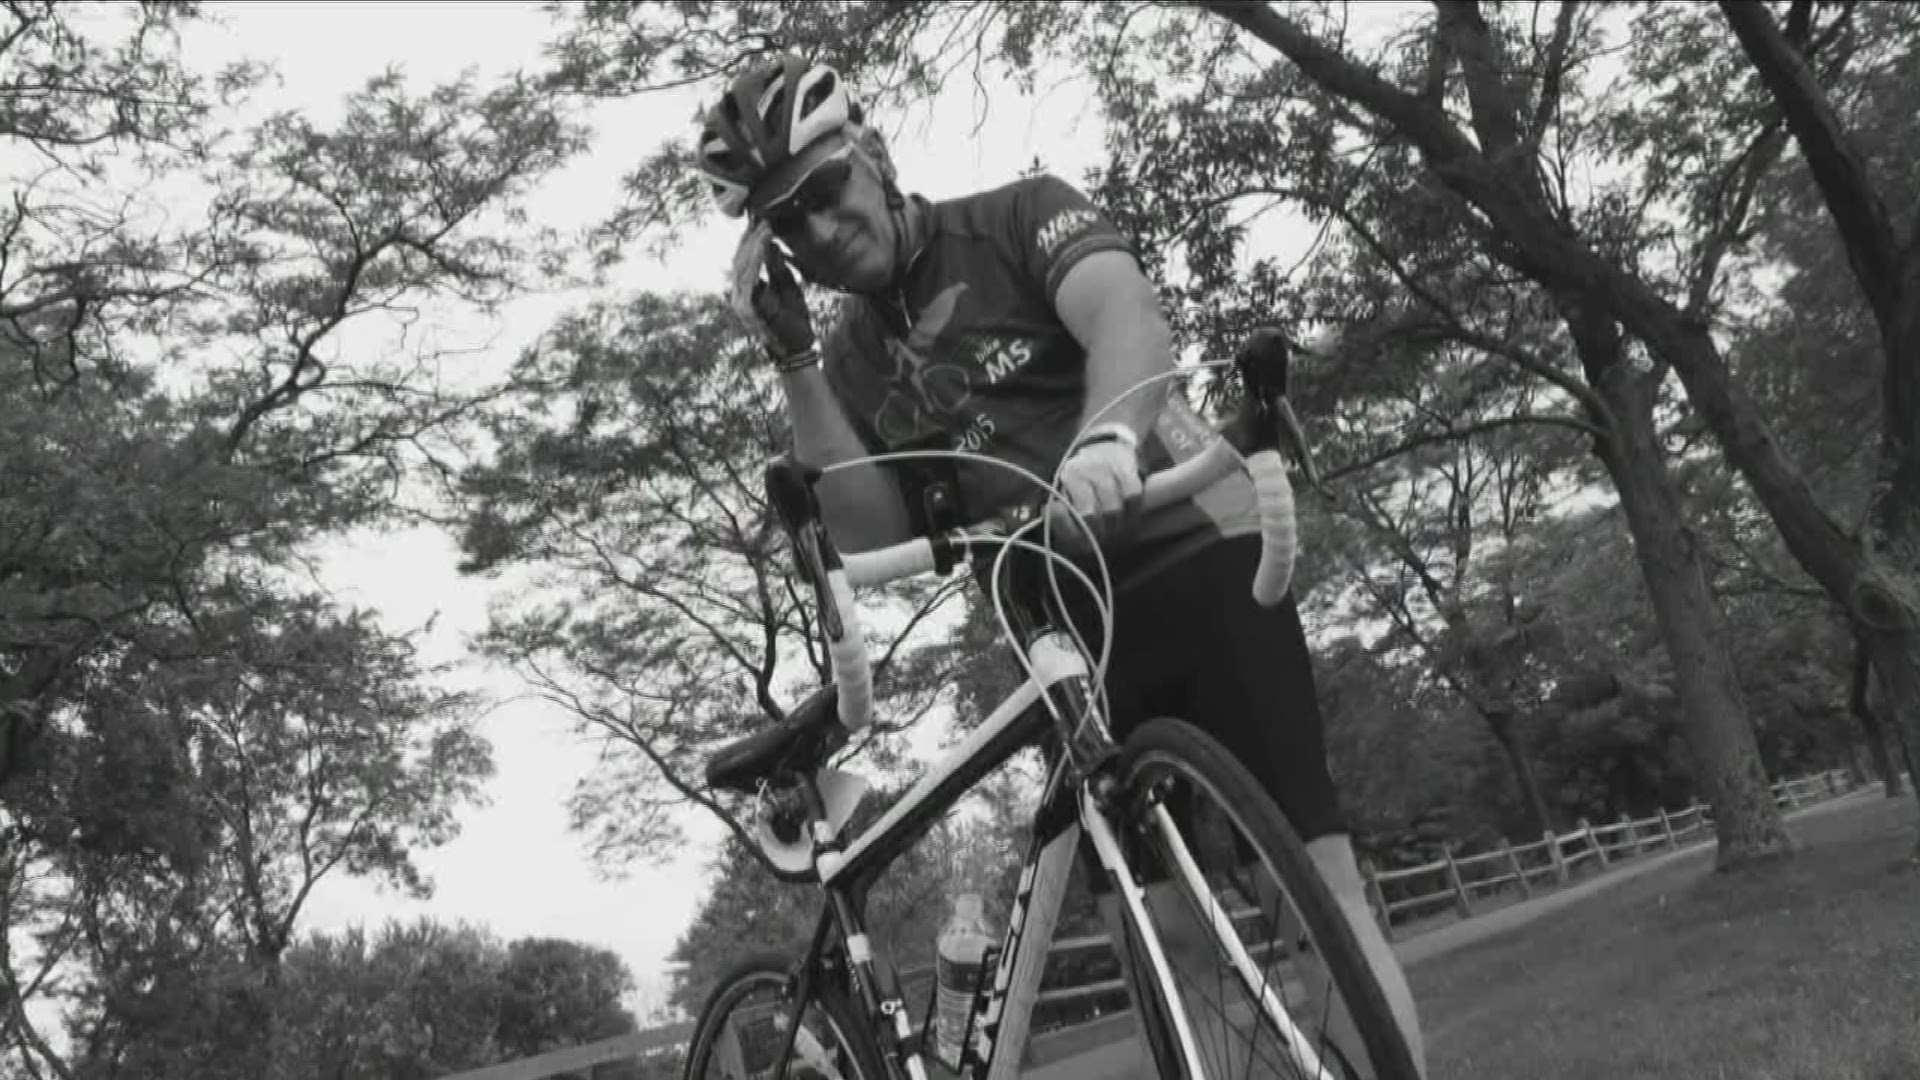 The annual ride for MS is next week and for one man it hits close to home.